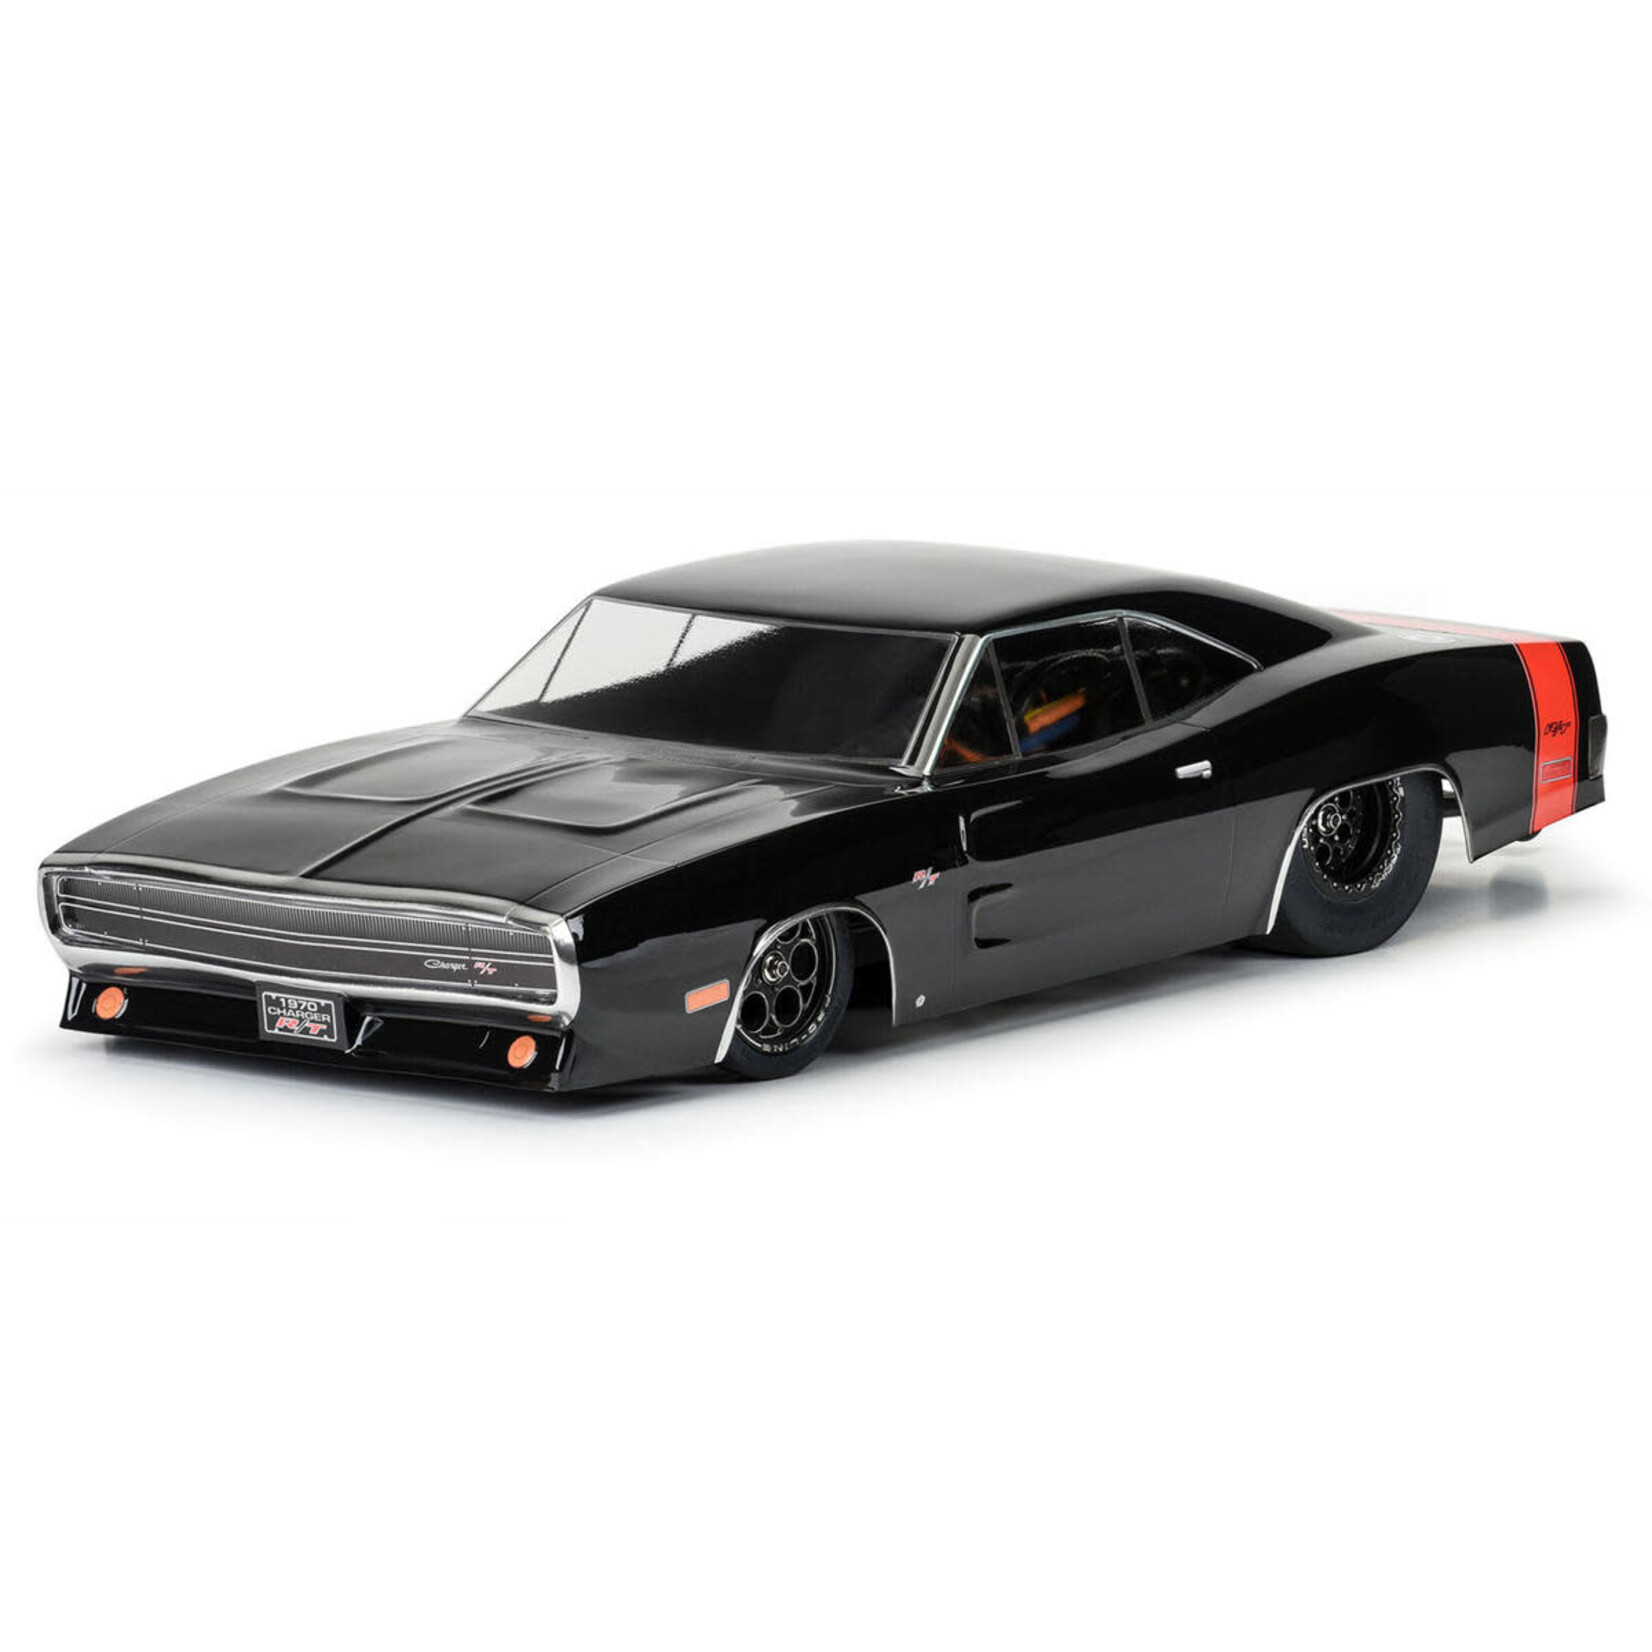 Pro-Line Pro-Line 1970 Dodge Charger No Prep Drag Racing Body (Clear) #3599-00